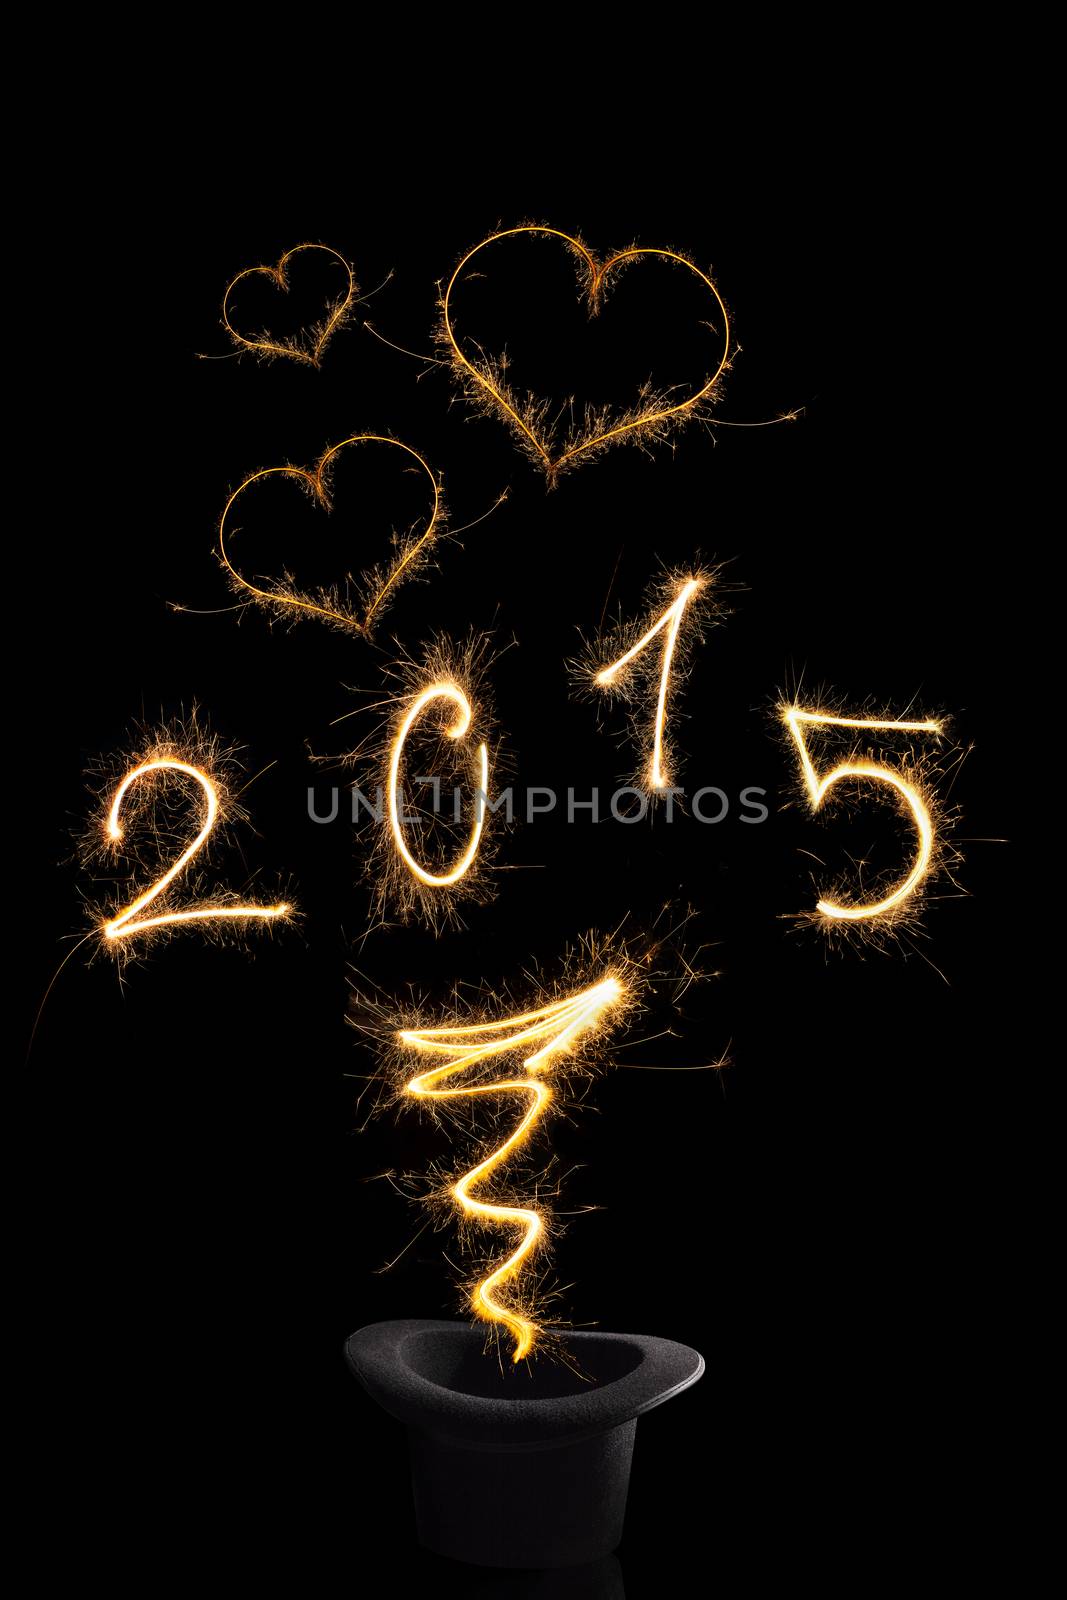 Magical happy new year. Magical fireworks from black top hat forming digits 2015, heart shapes and abstract light lines isolated on black background. Happy new year background.